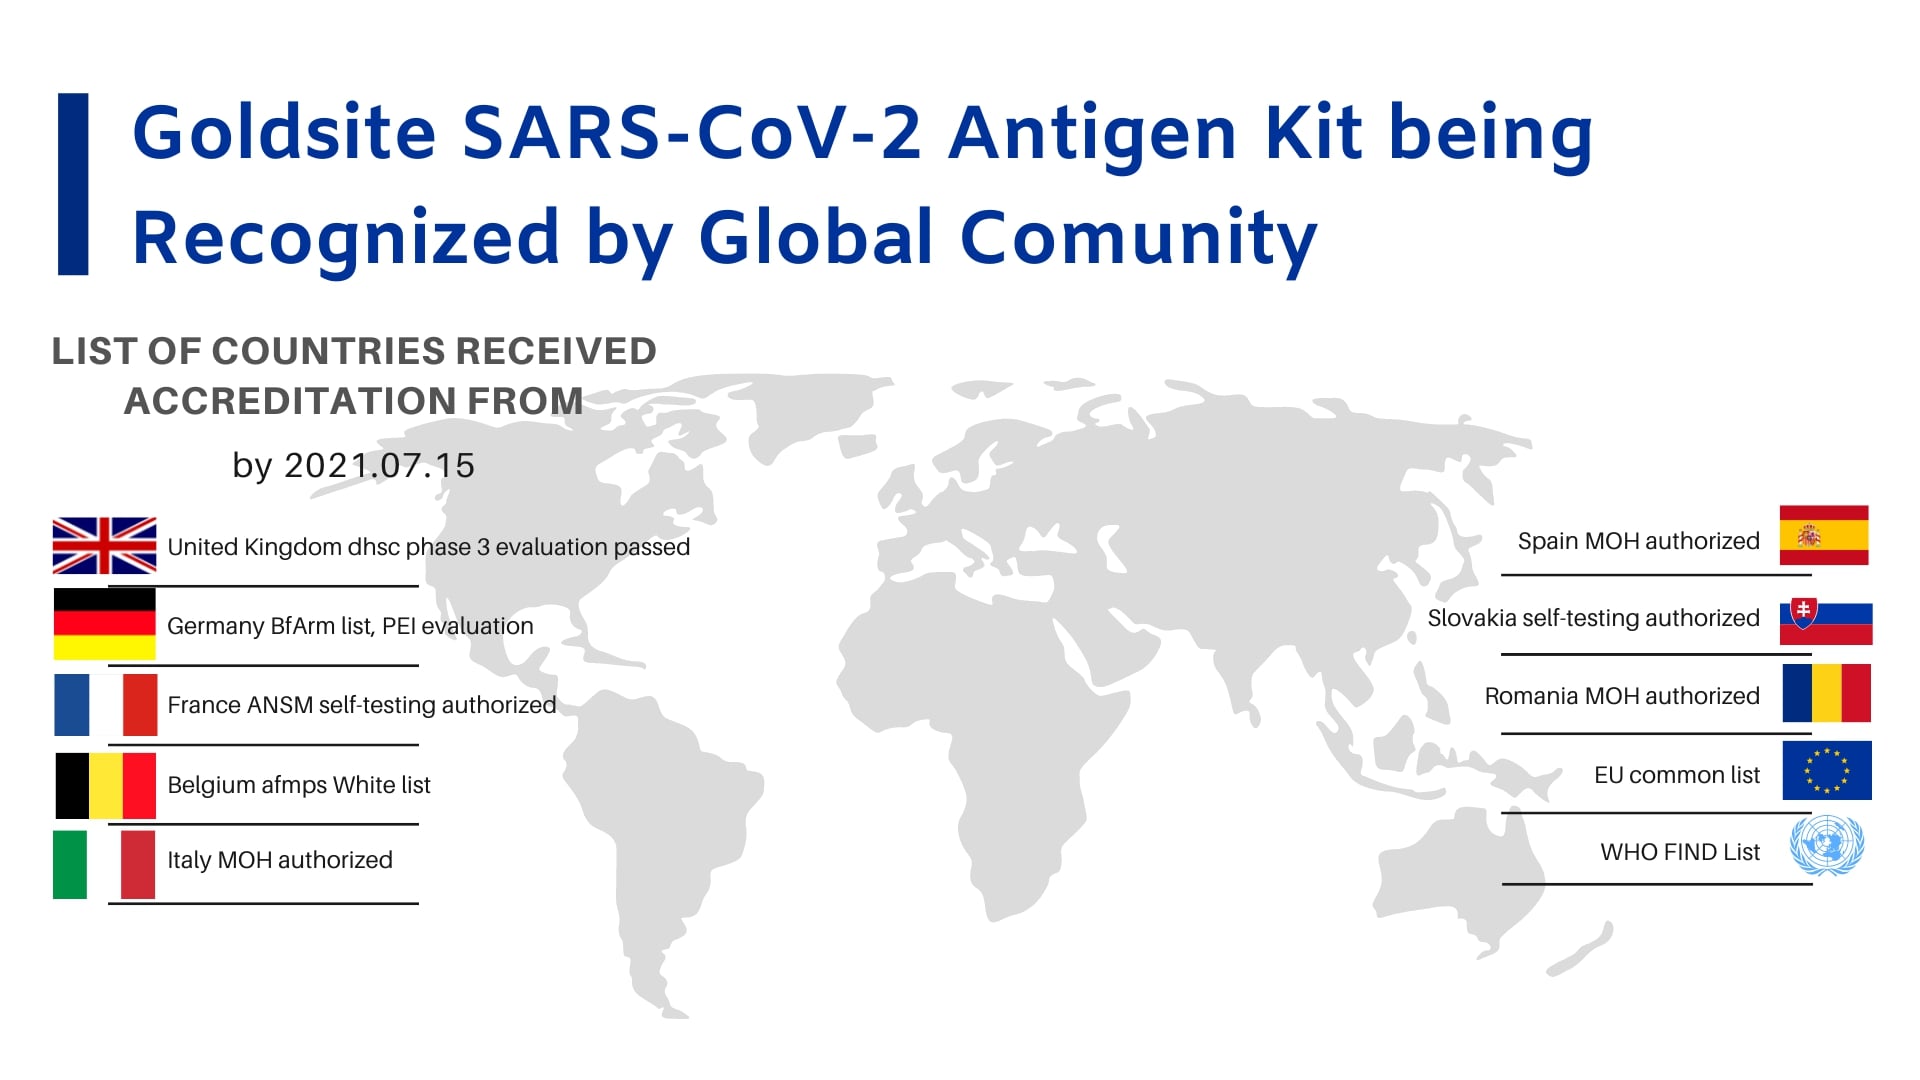 An Overview of SARS-CoV-2 Antigen Kit Certification Received by Goldsite (In Update) 